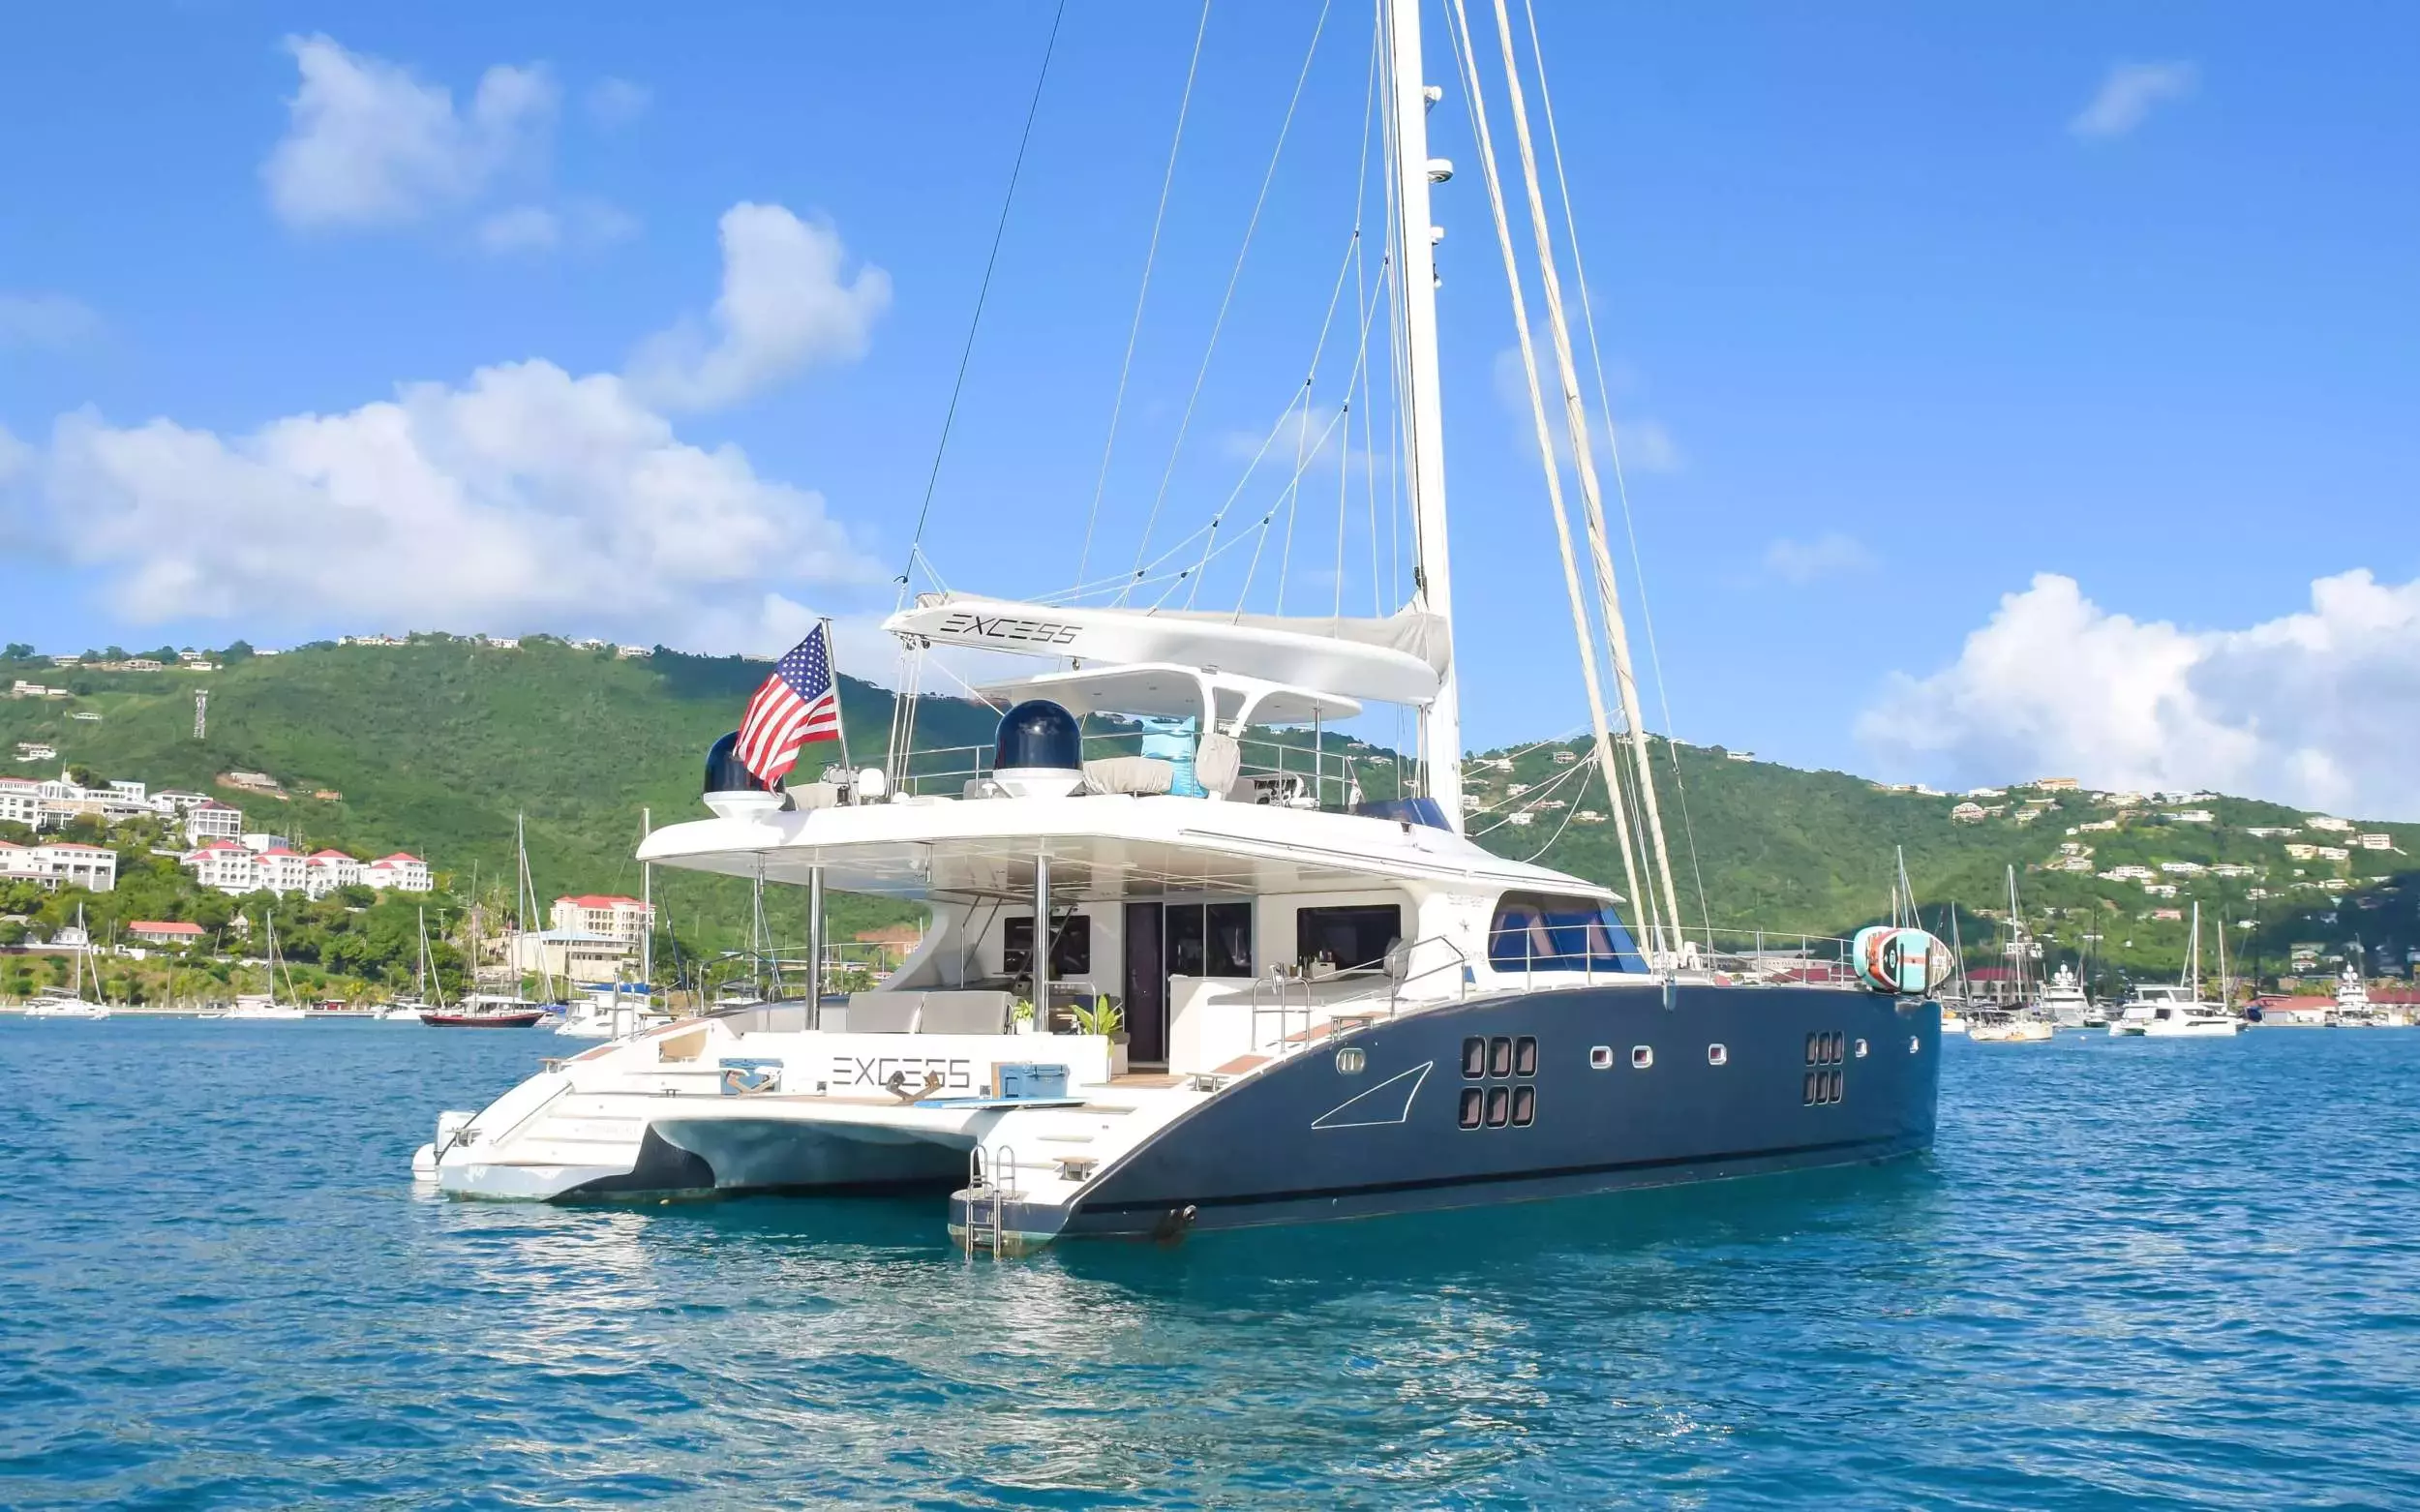 Excess by Sunreef Yachts - Special Offer for a private Luxury Catamaran Charter in Virgin Gorda with a crew